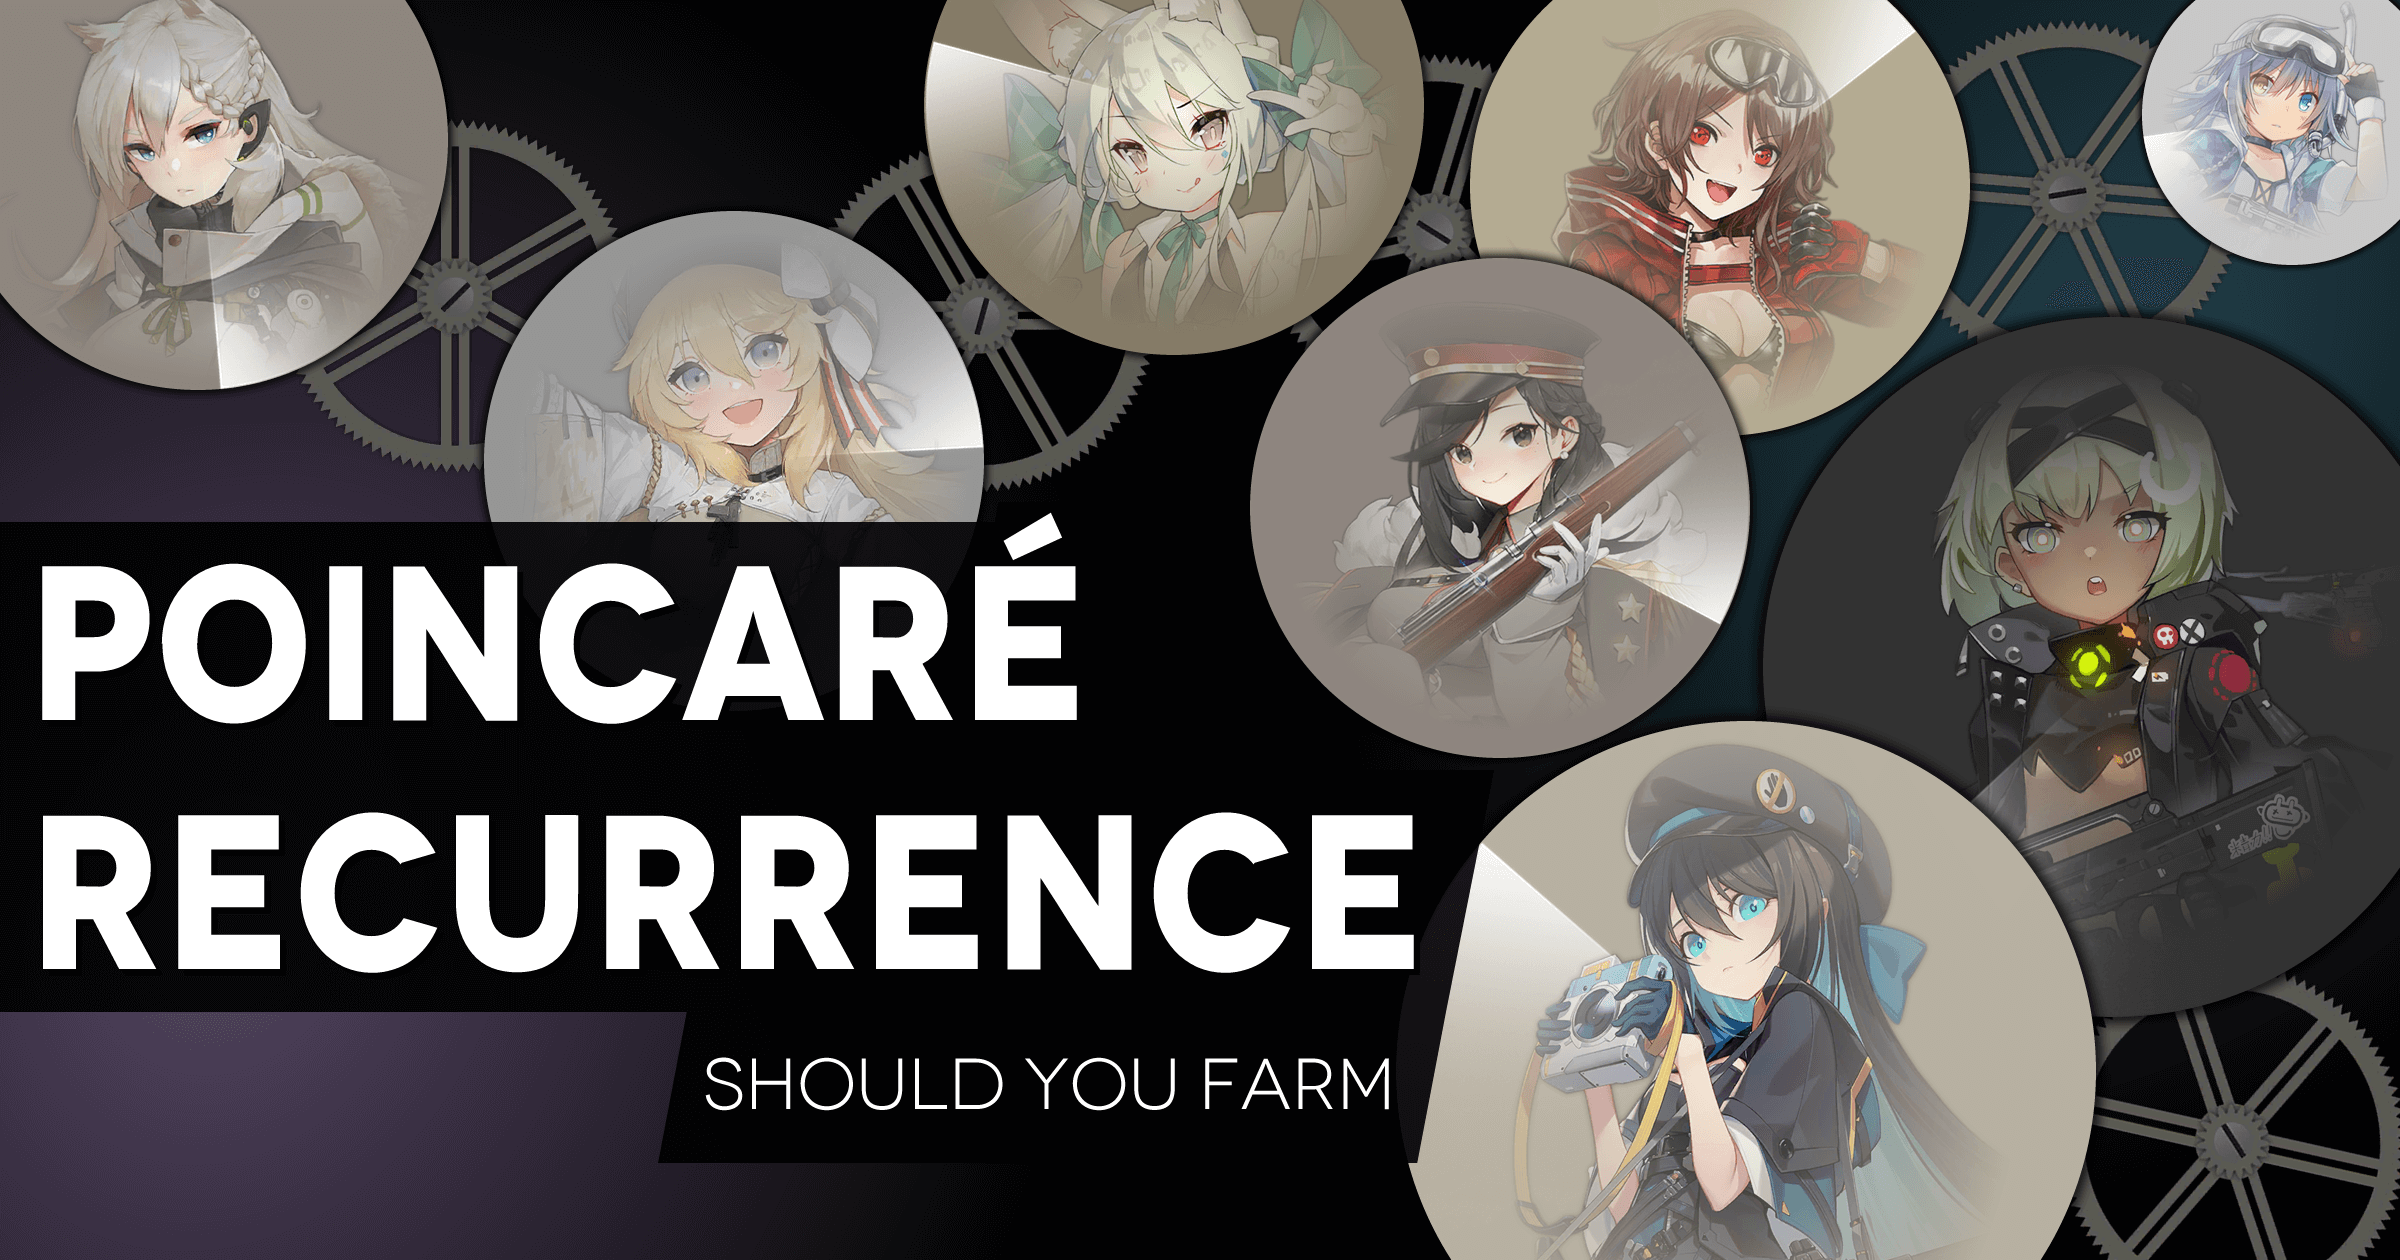 Should you Farm Poincare Recurrence